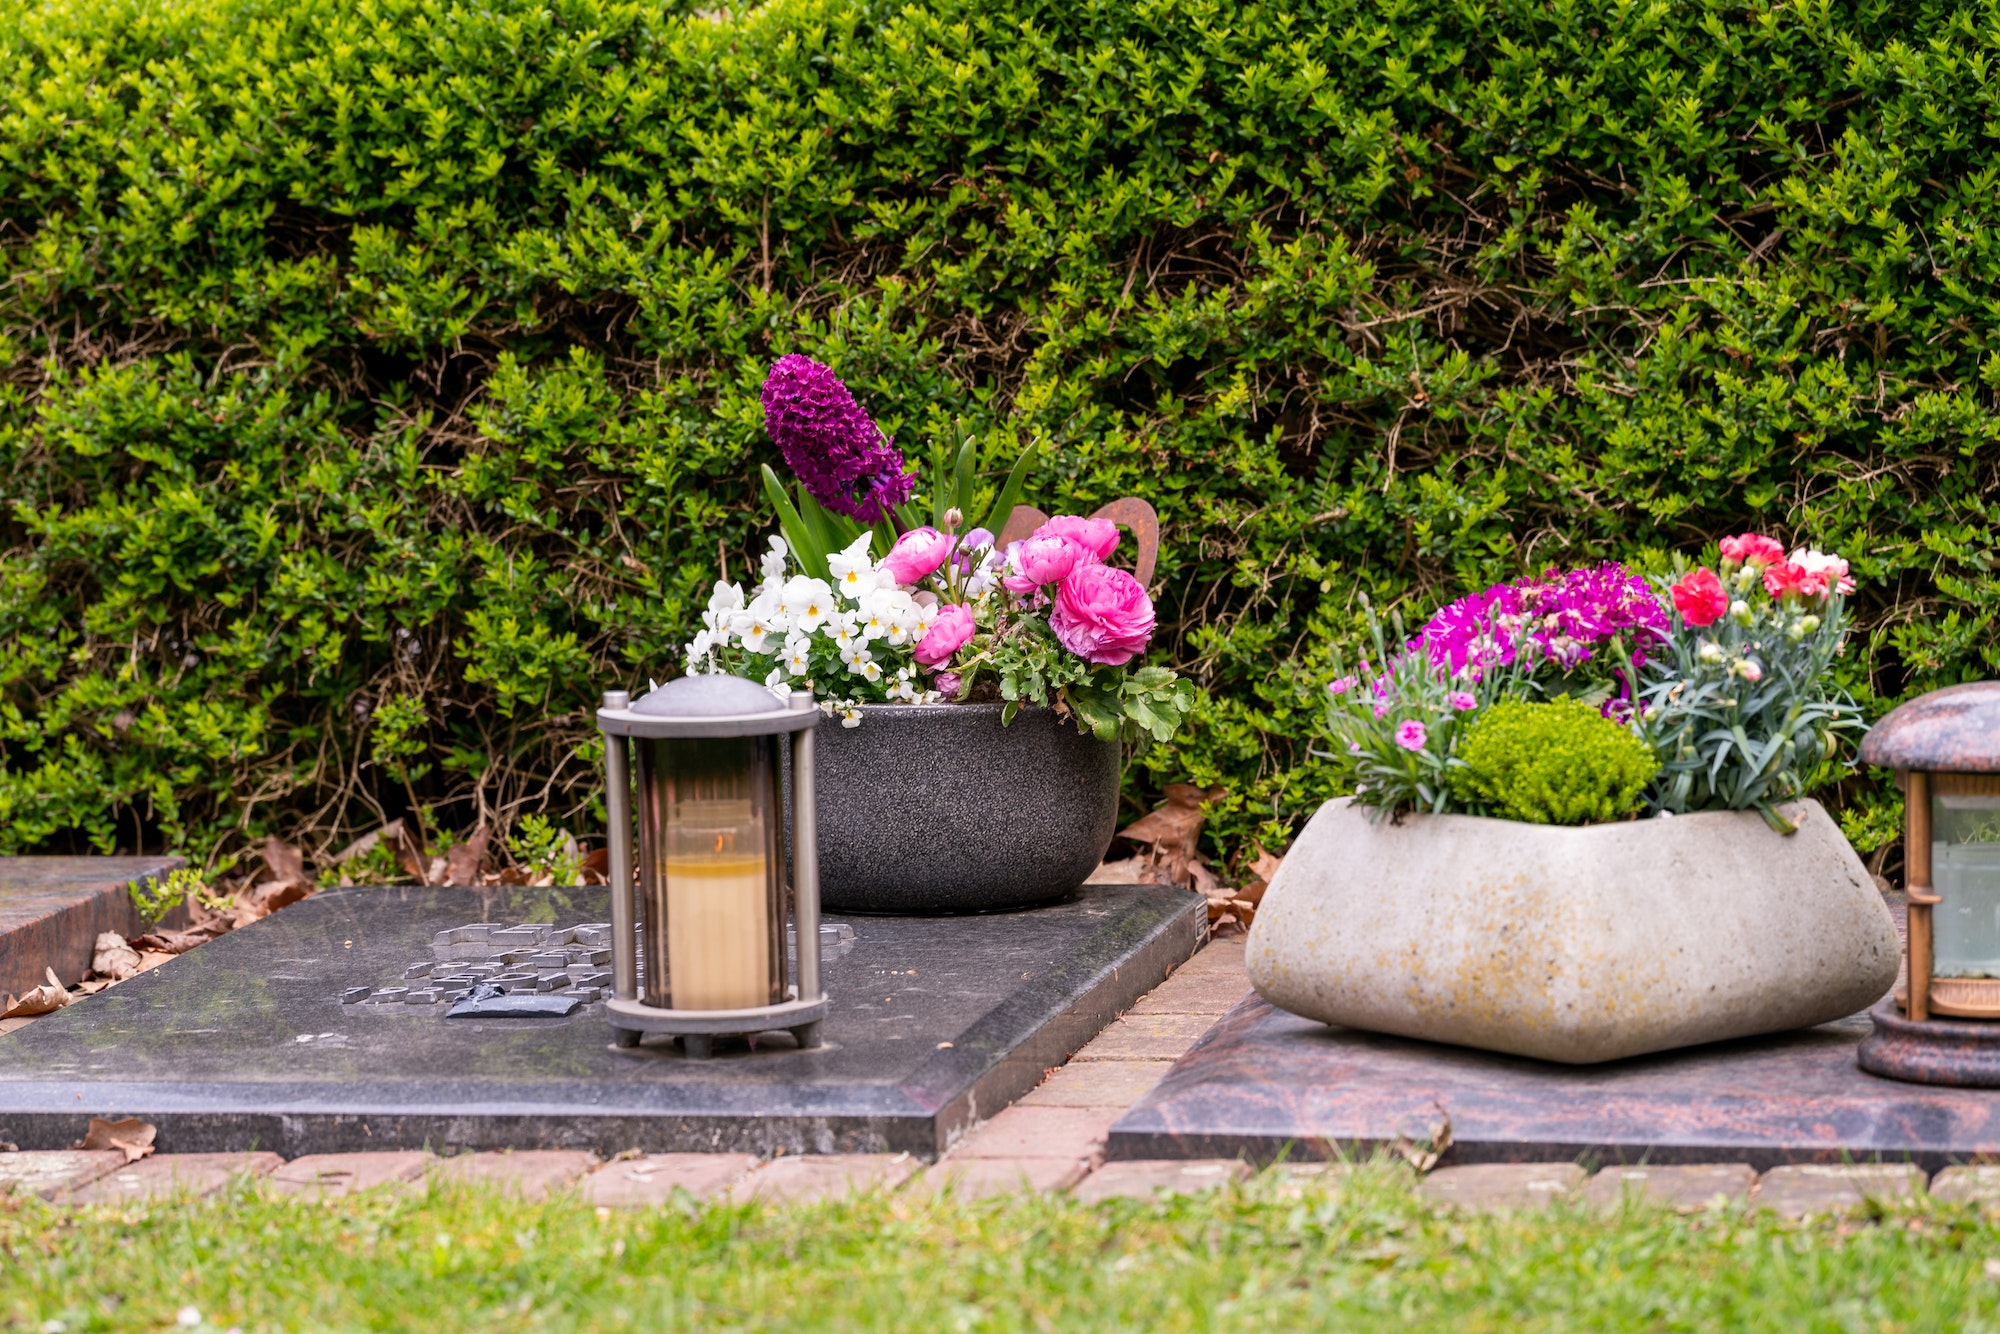 Grave light with burning candle on a grave with flowers